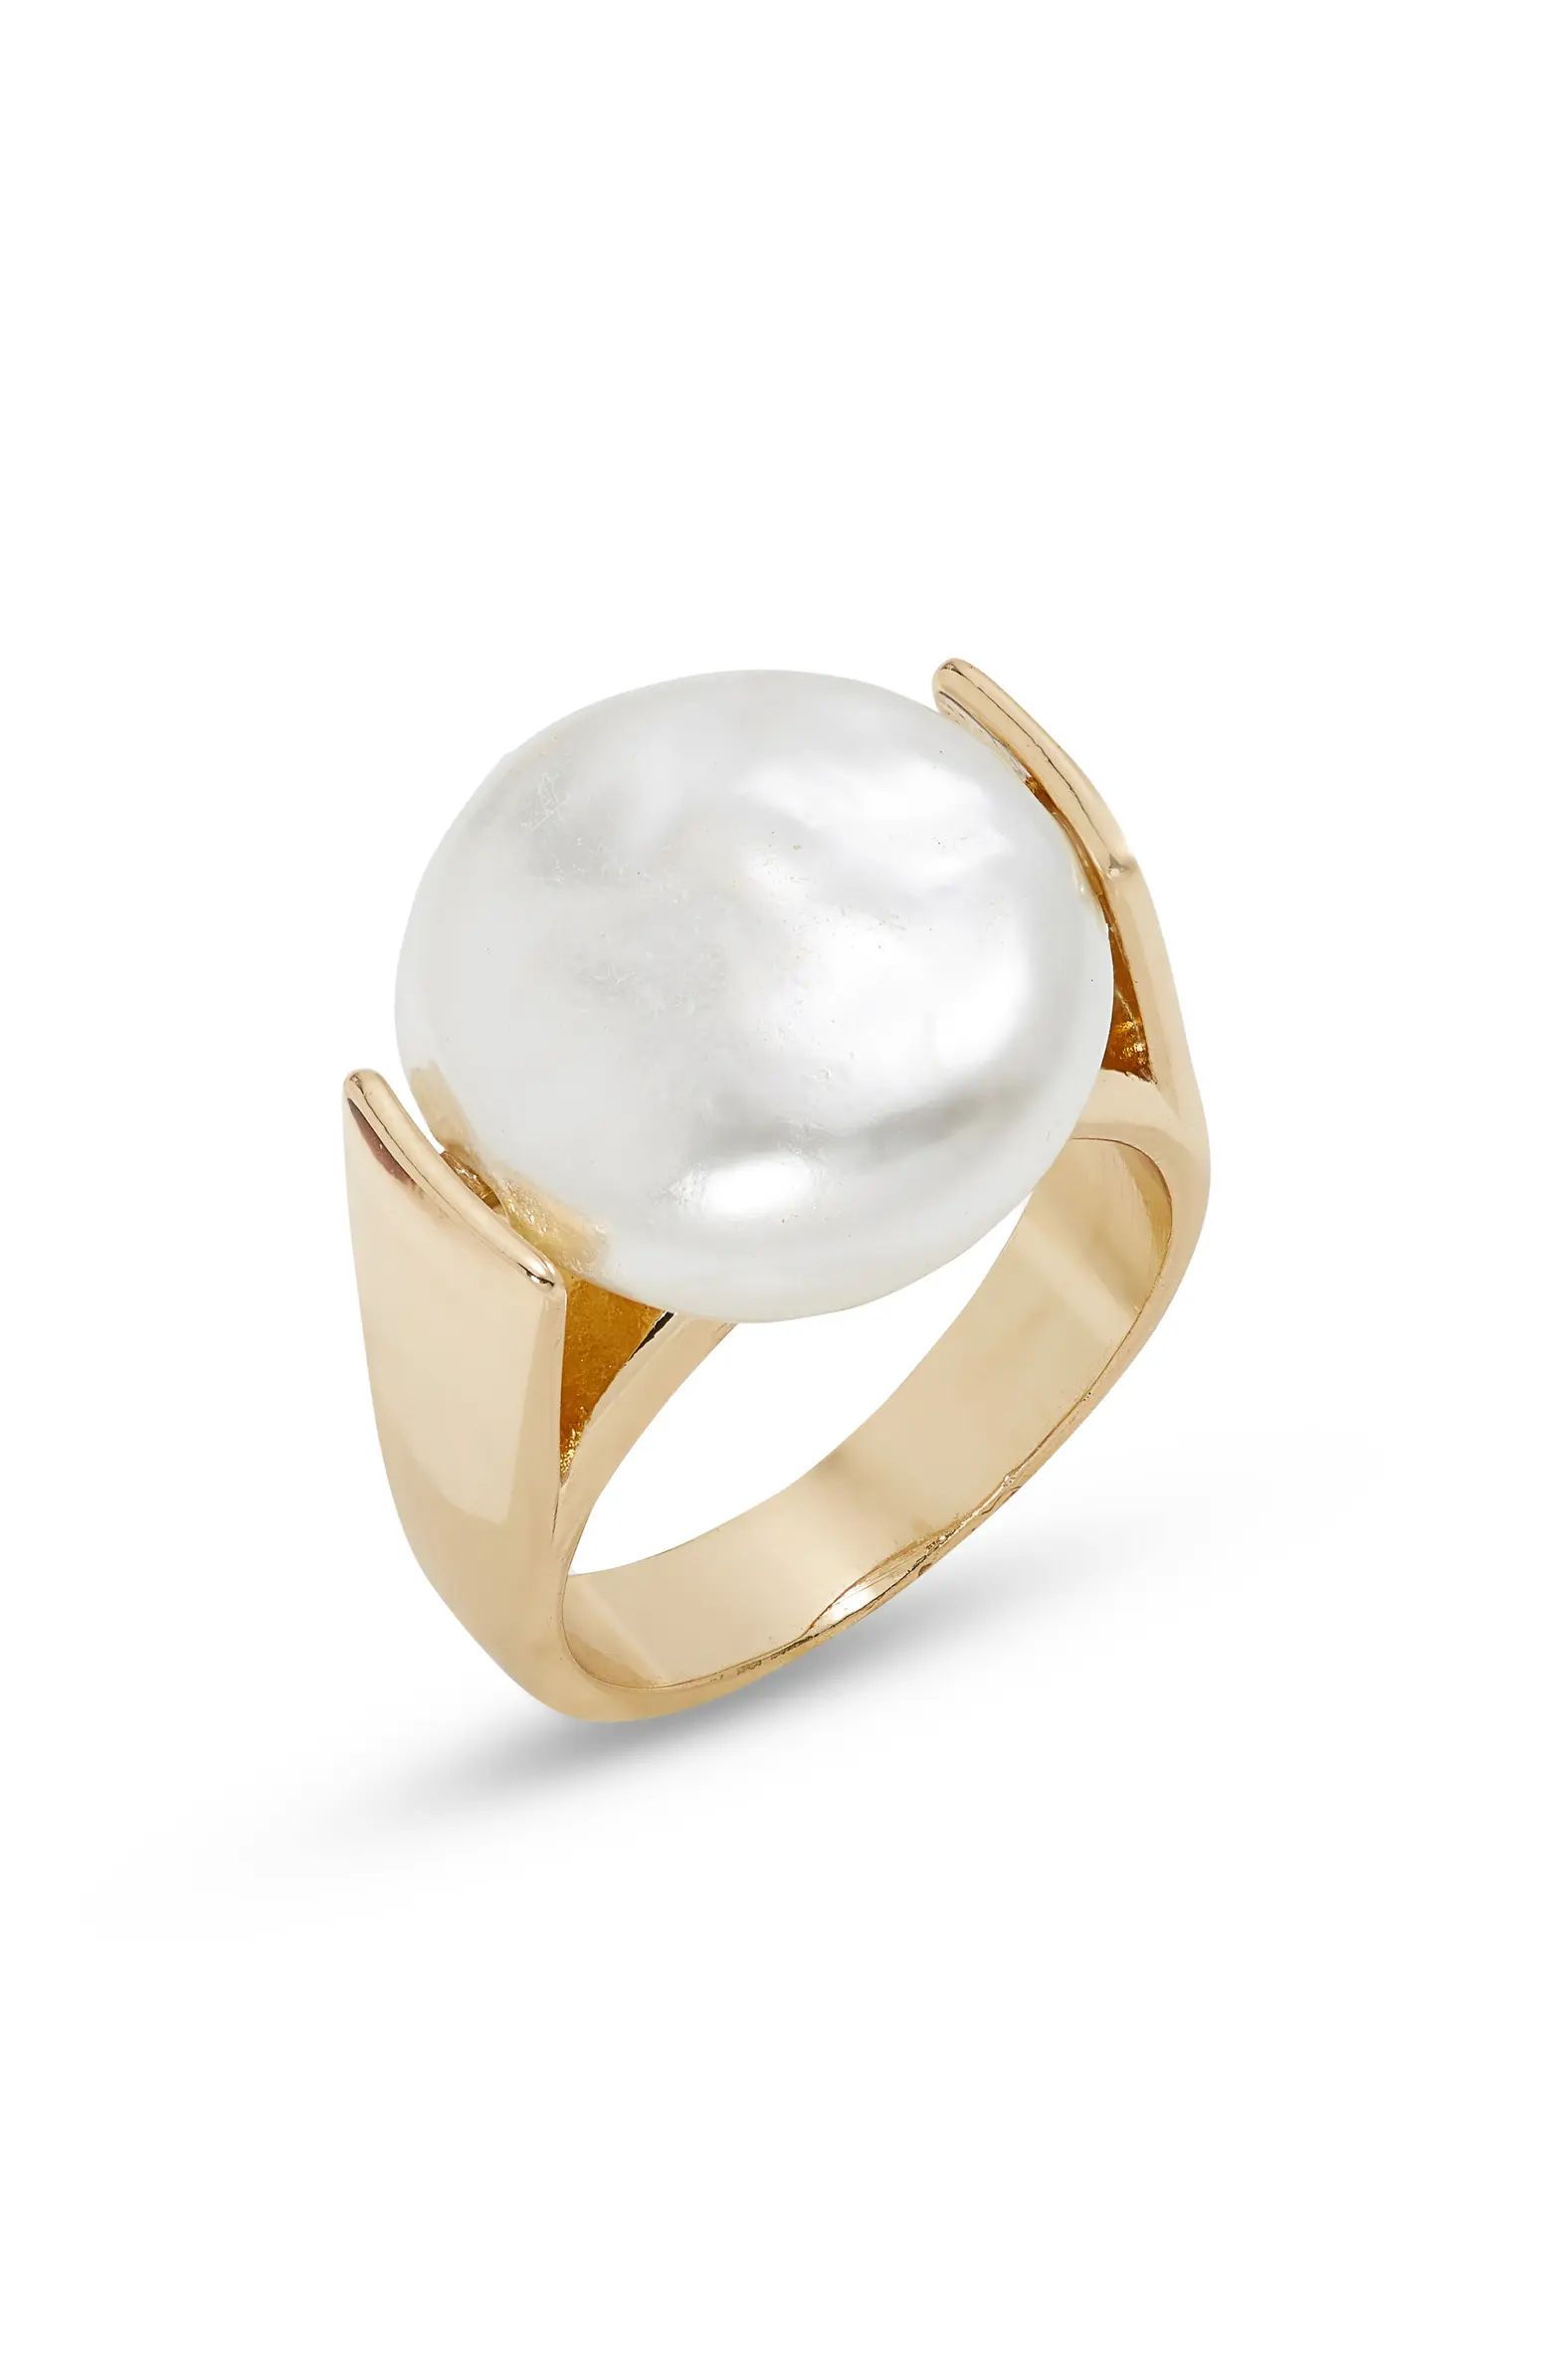 Imitation Pearl Cocktail Ring | Nordstrom